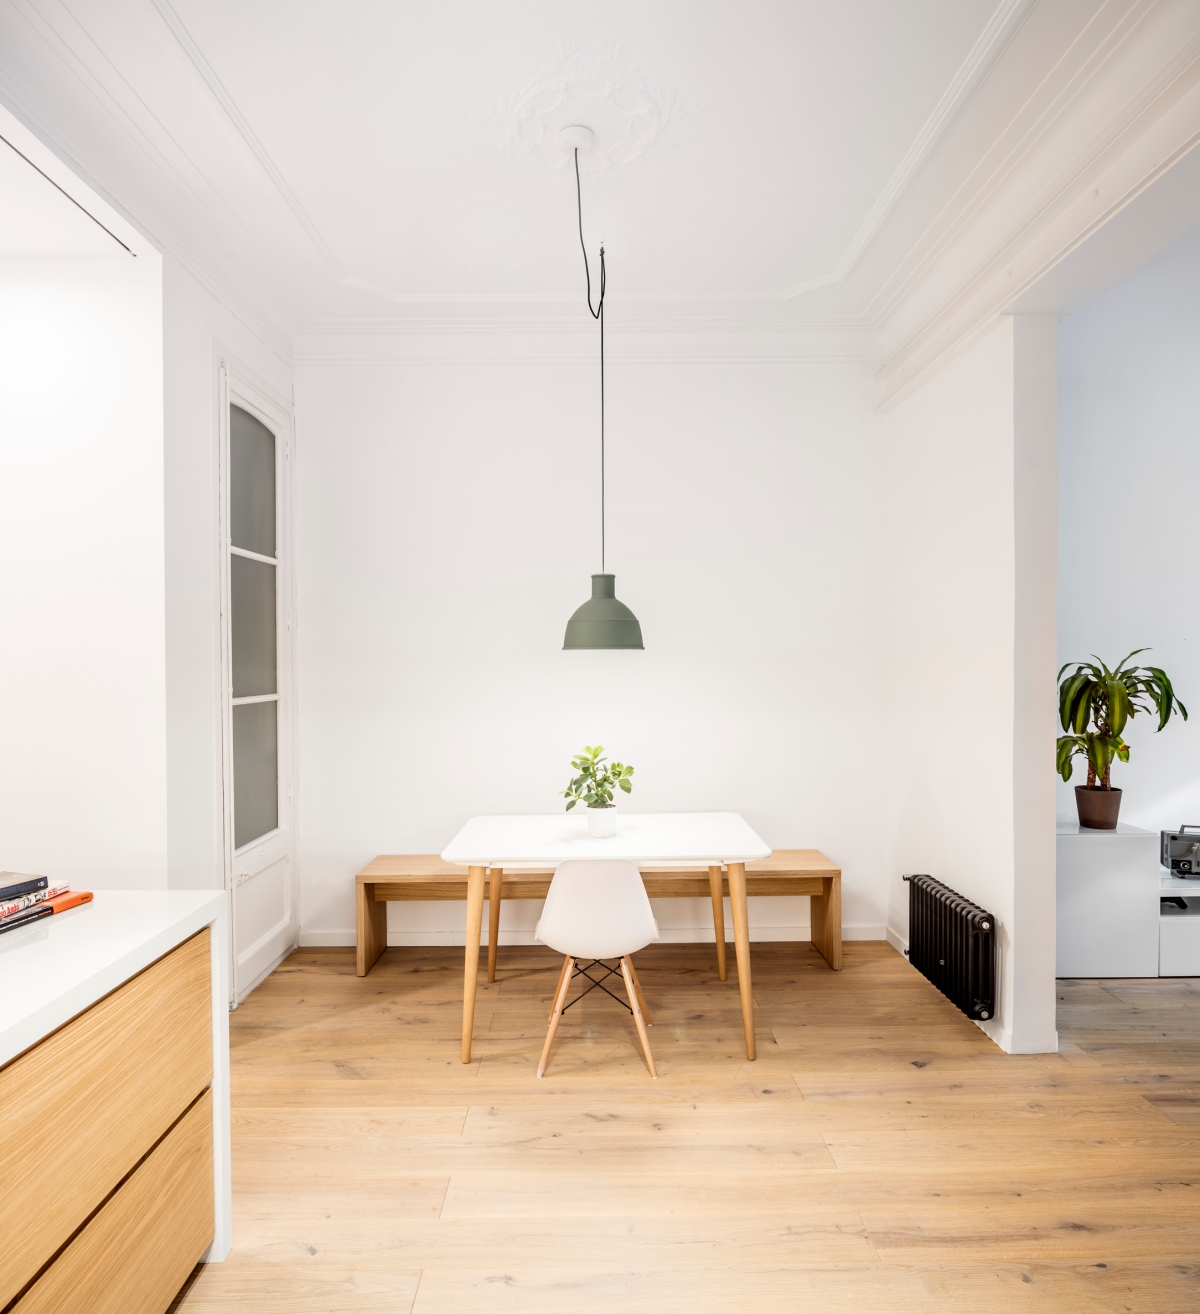 EO arquitectura - Alan's apartment renovation: dining space